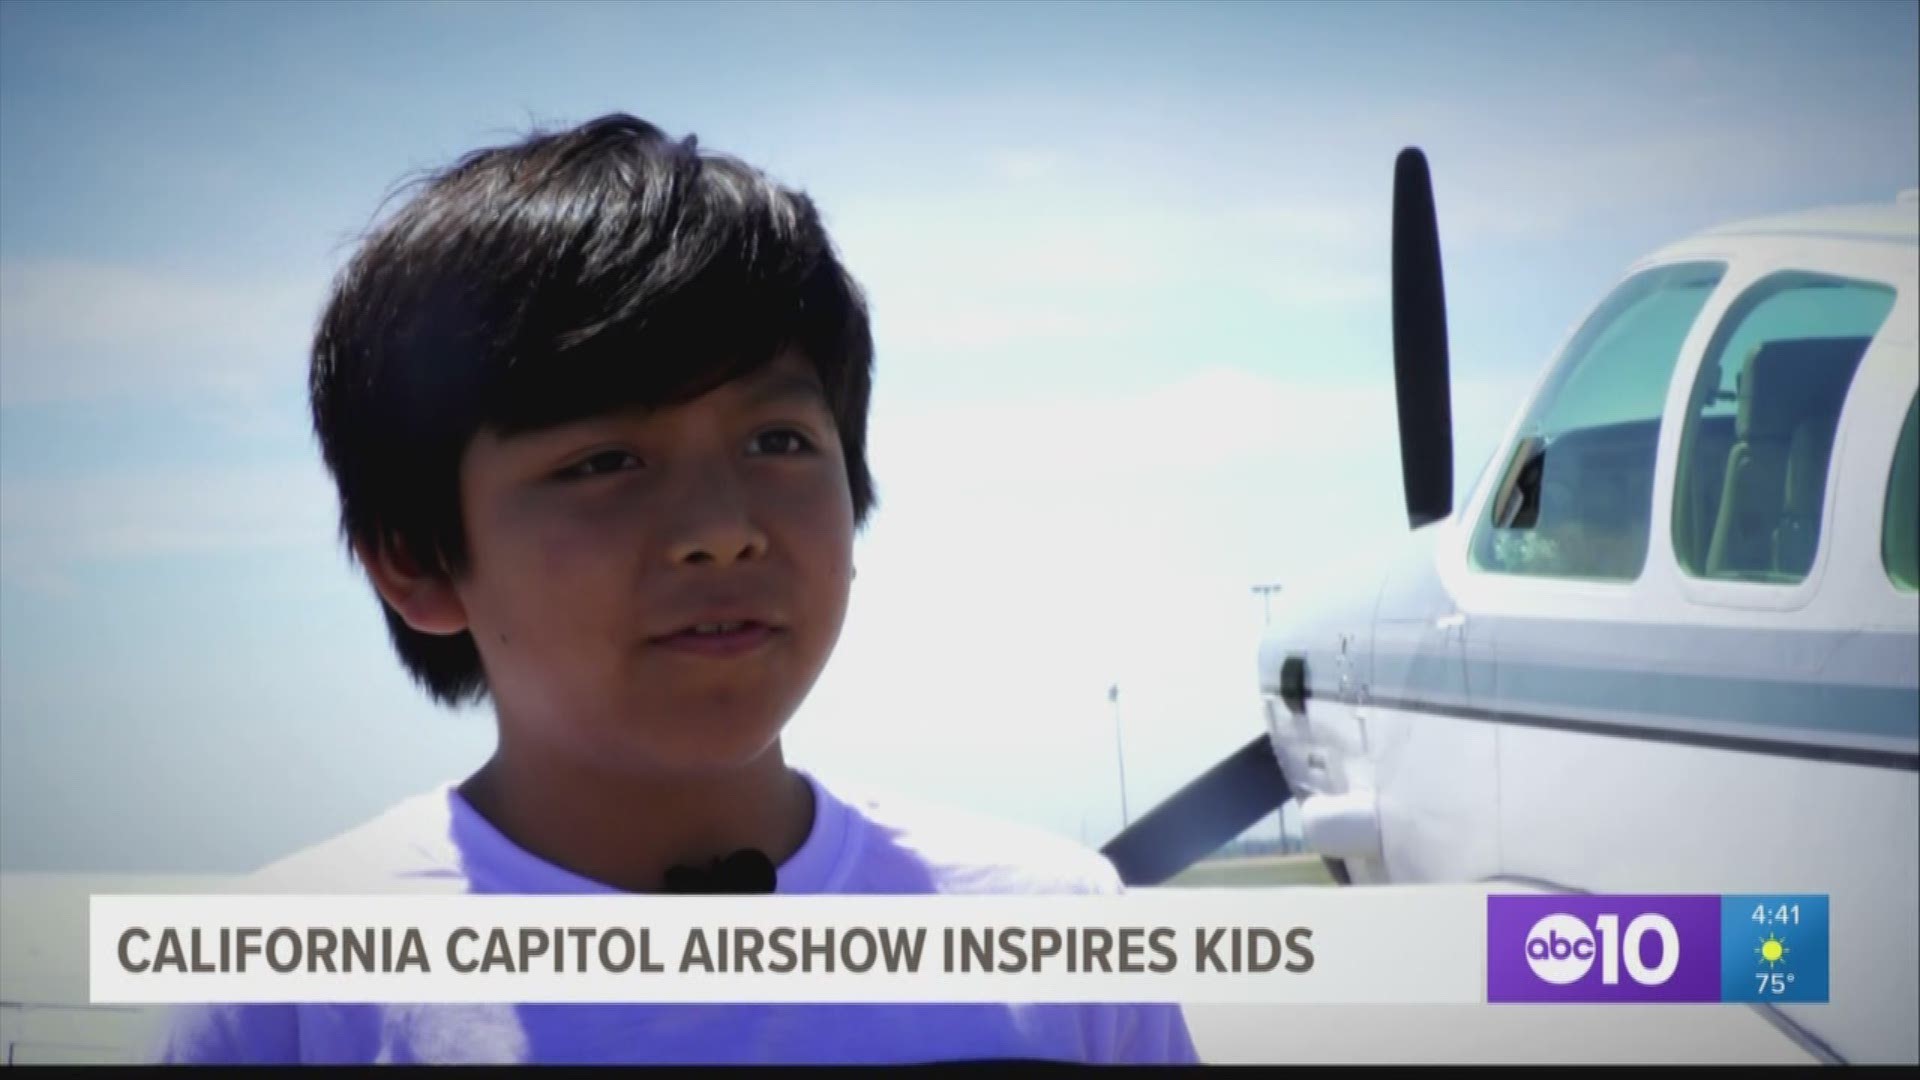 The California Capital Airshow organization invited hundreds of students to the Mather Airport for a hands-on aviation experience Sunday afternoon. 